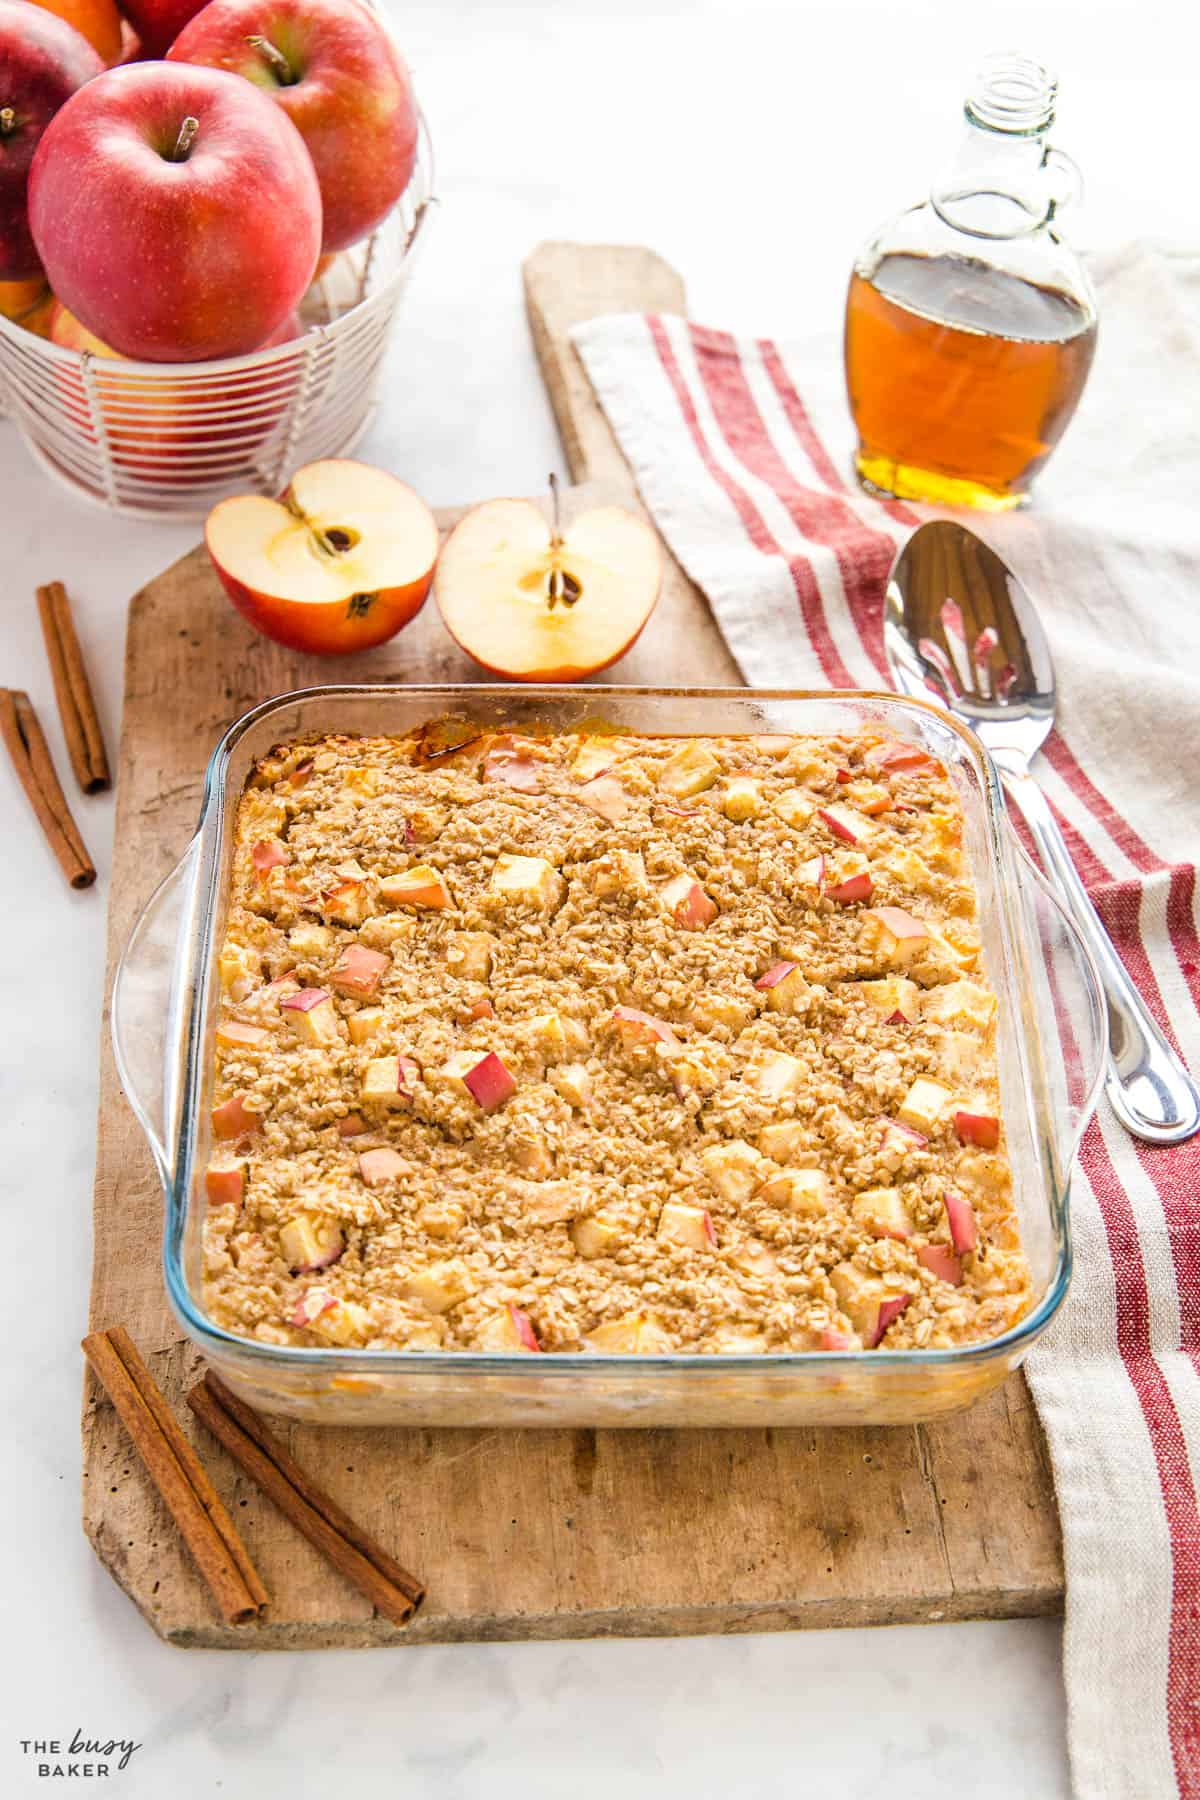 baked oats with apples and cinnamon